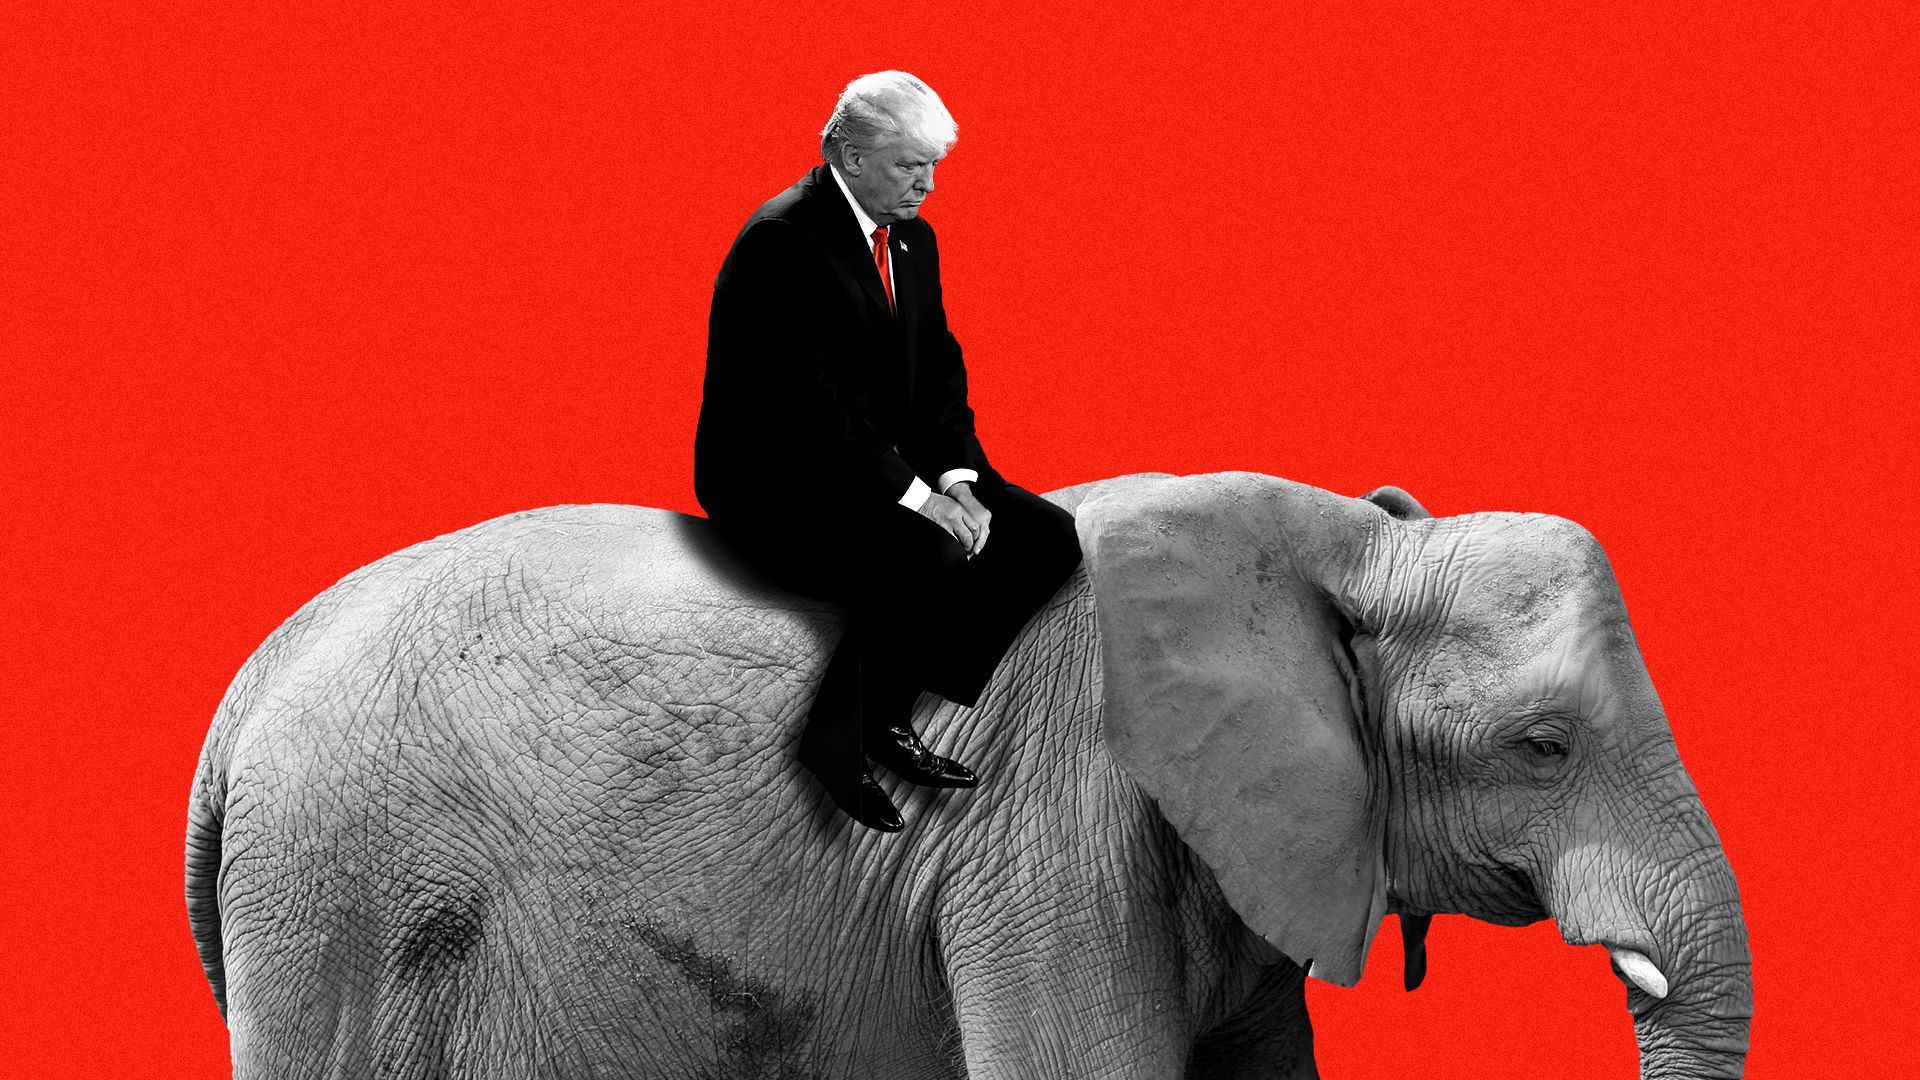 Photo illustration of President Donald Trump riding on the back of an elephant